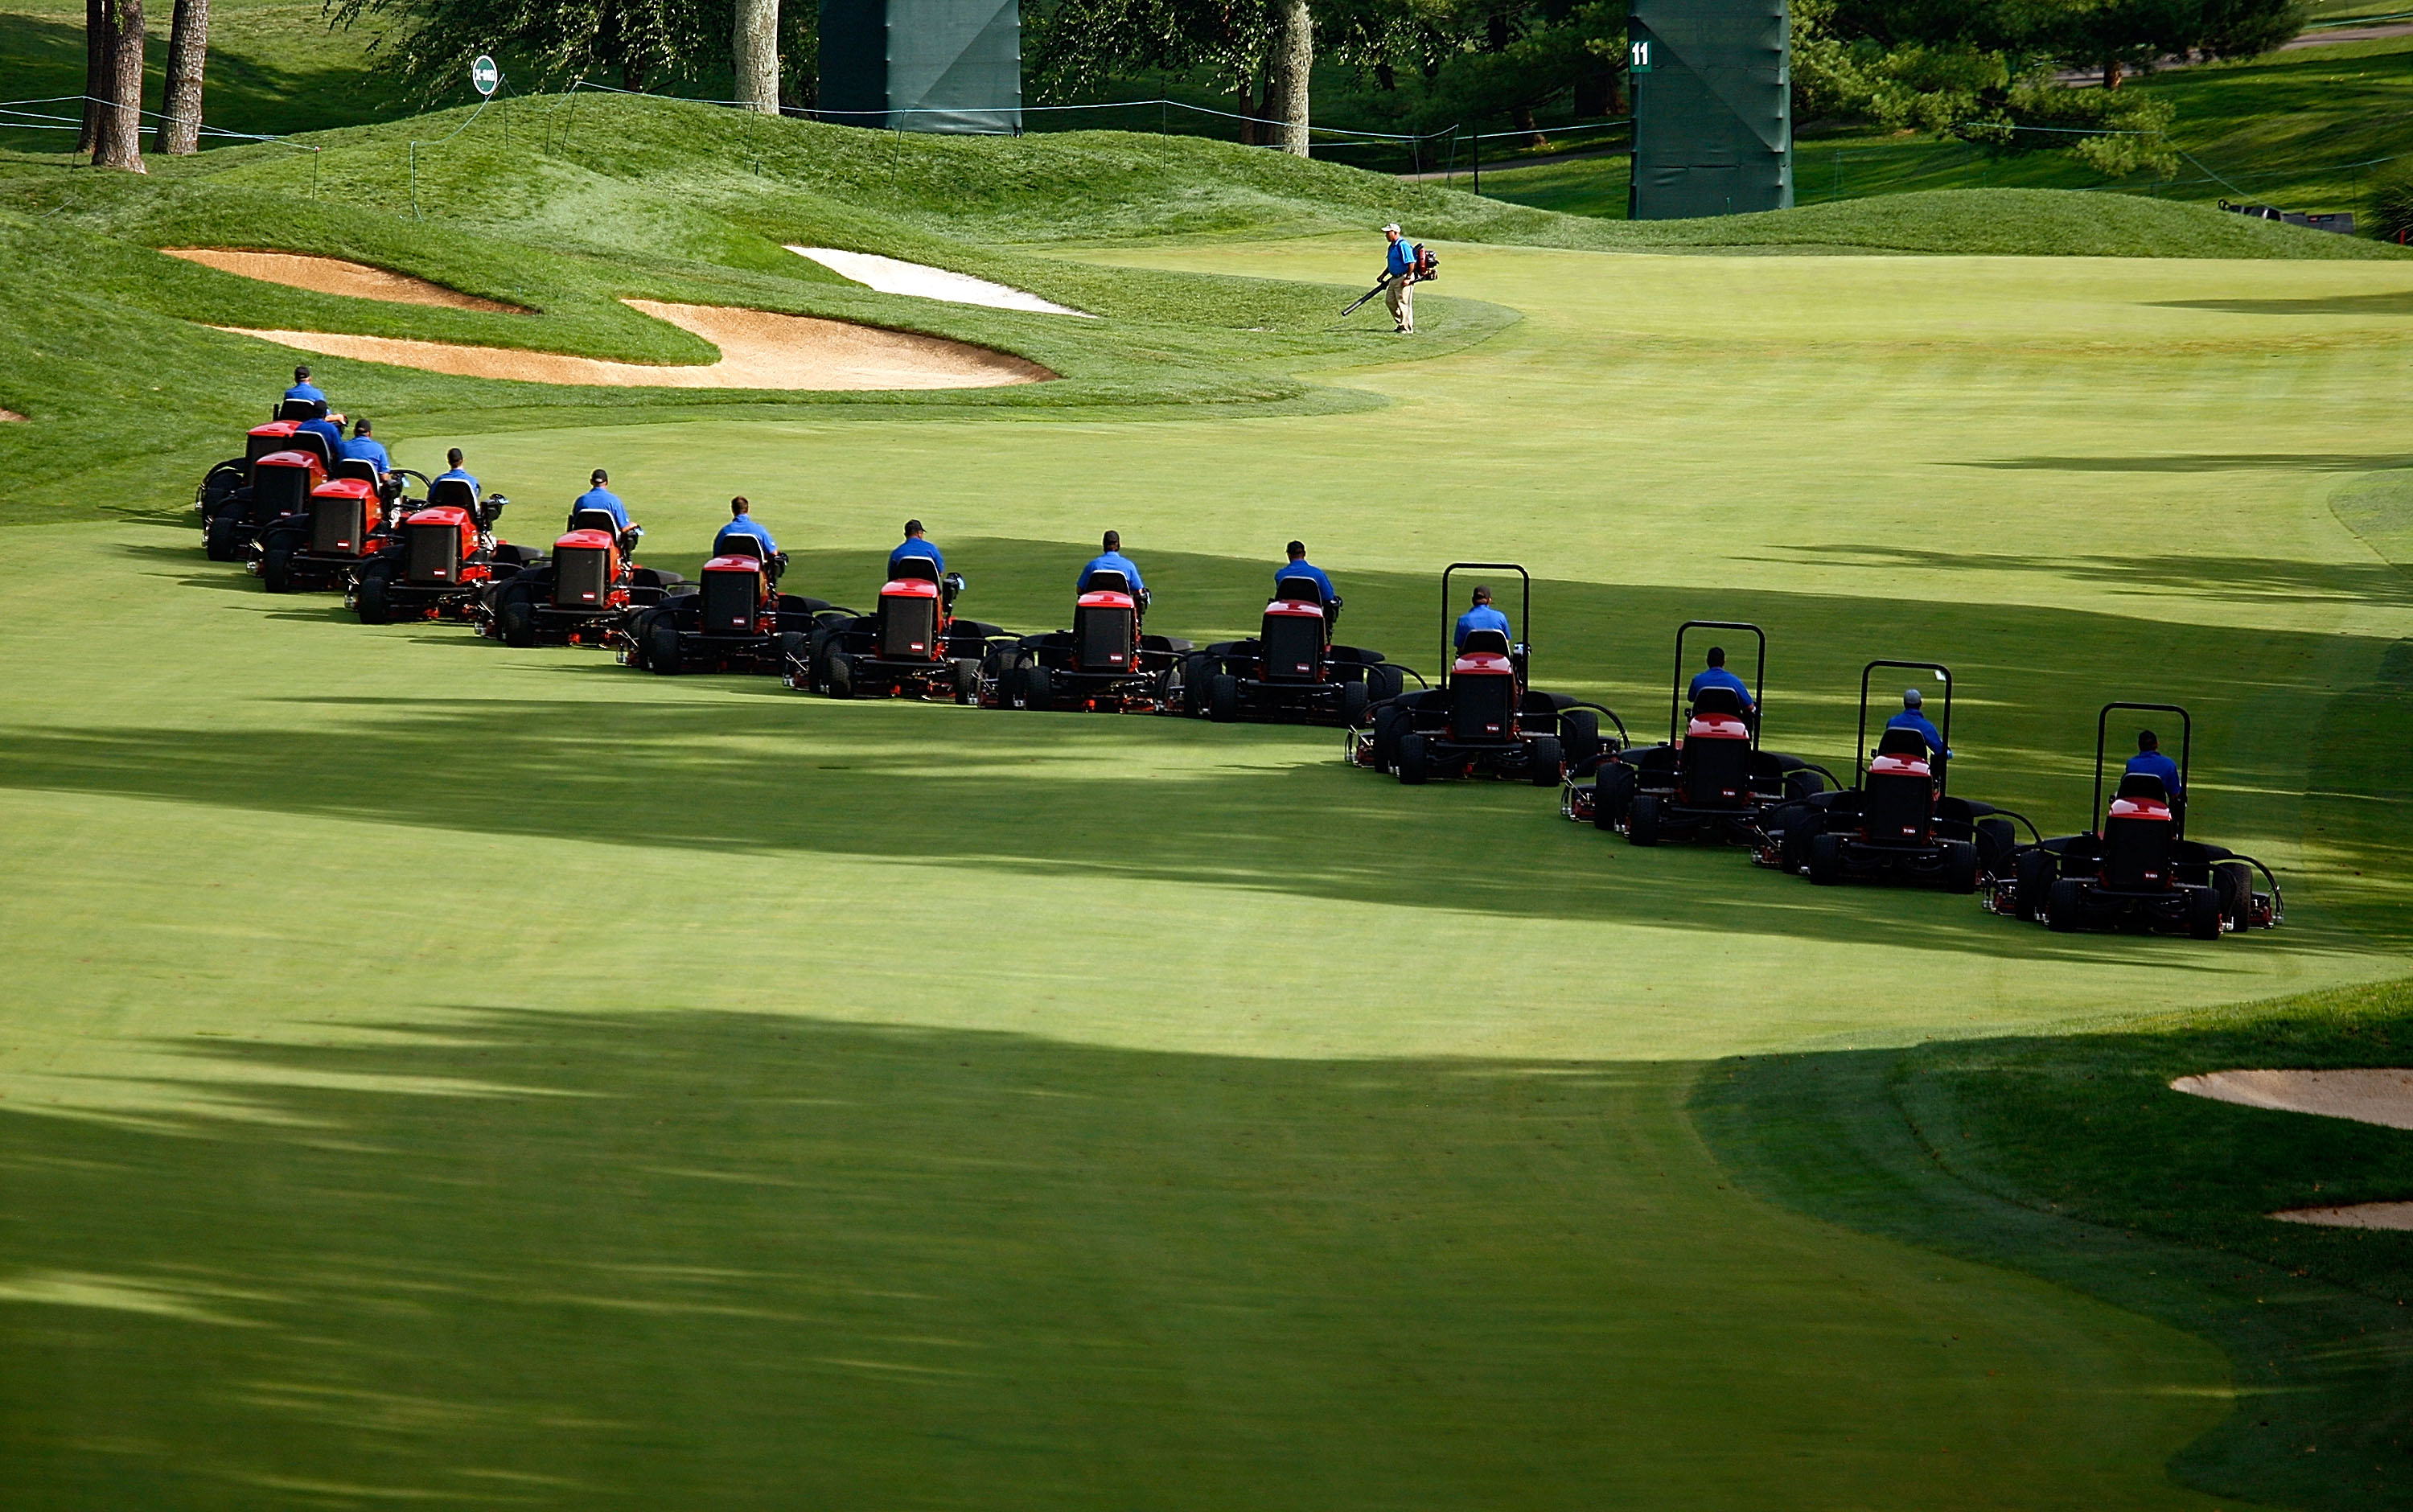 BETHESDA, MD - JULY 04:  Course grass mowers are seen during the third round of the AT&T National at the Congressional Country Club on July 4, 2009 in Bethesda, Maryland.  (Photo by Scott Halleran/Getty Images)